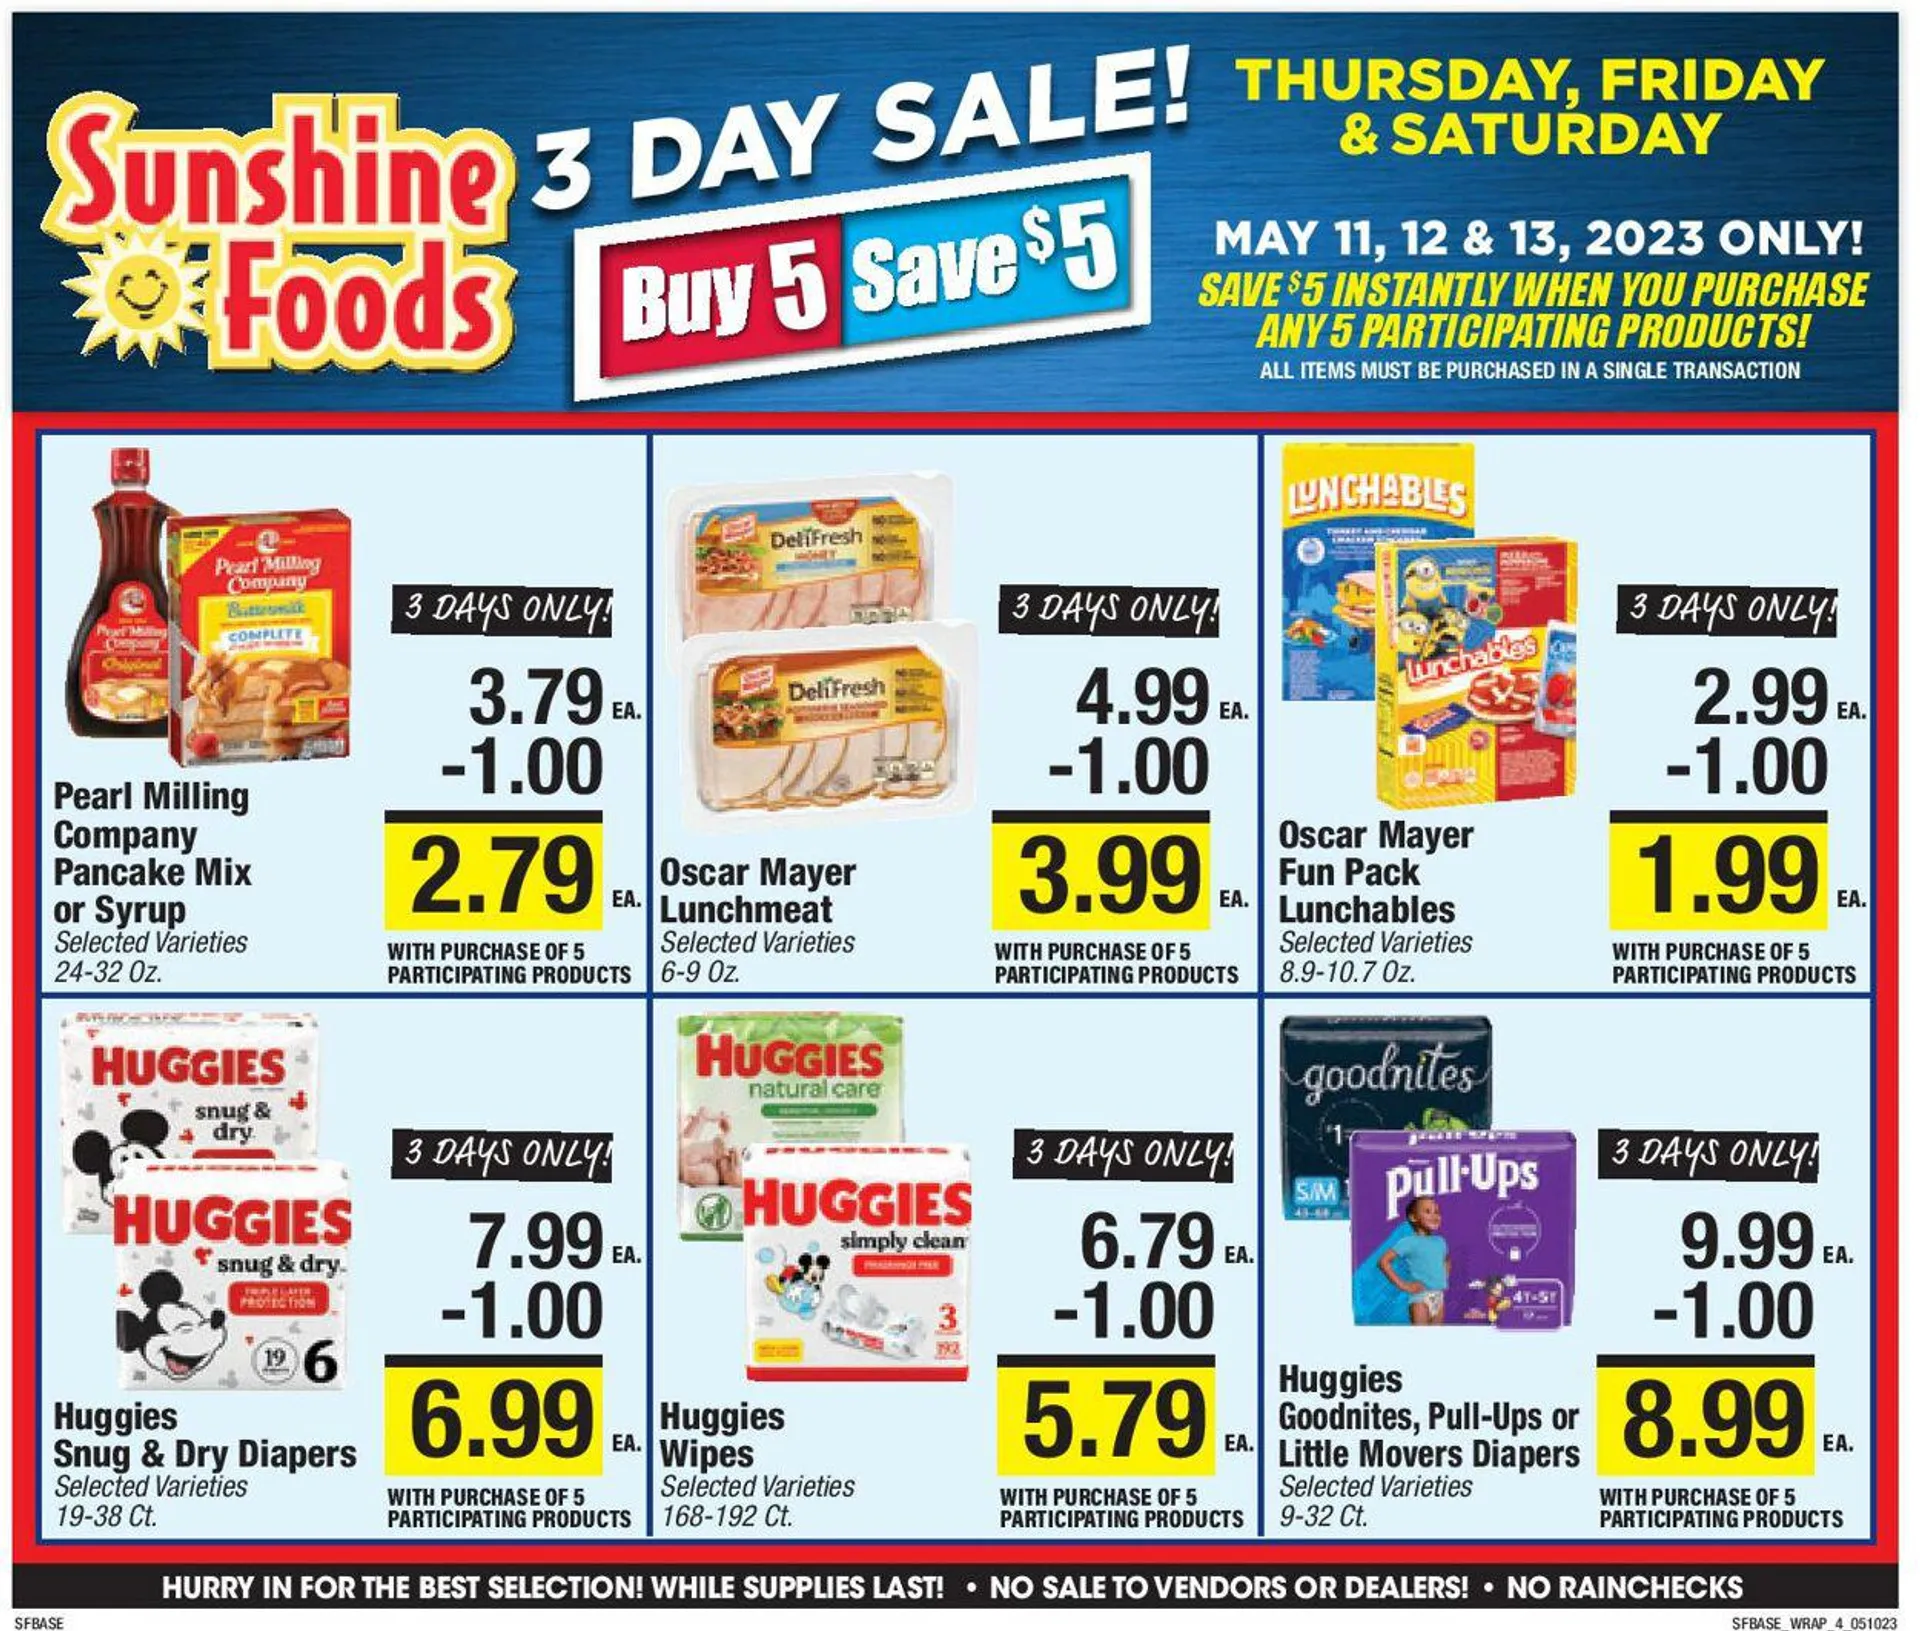 Sunshine Foods Current weekly ad - 12